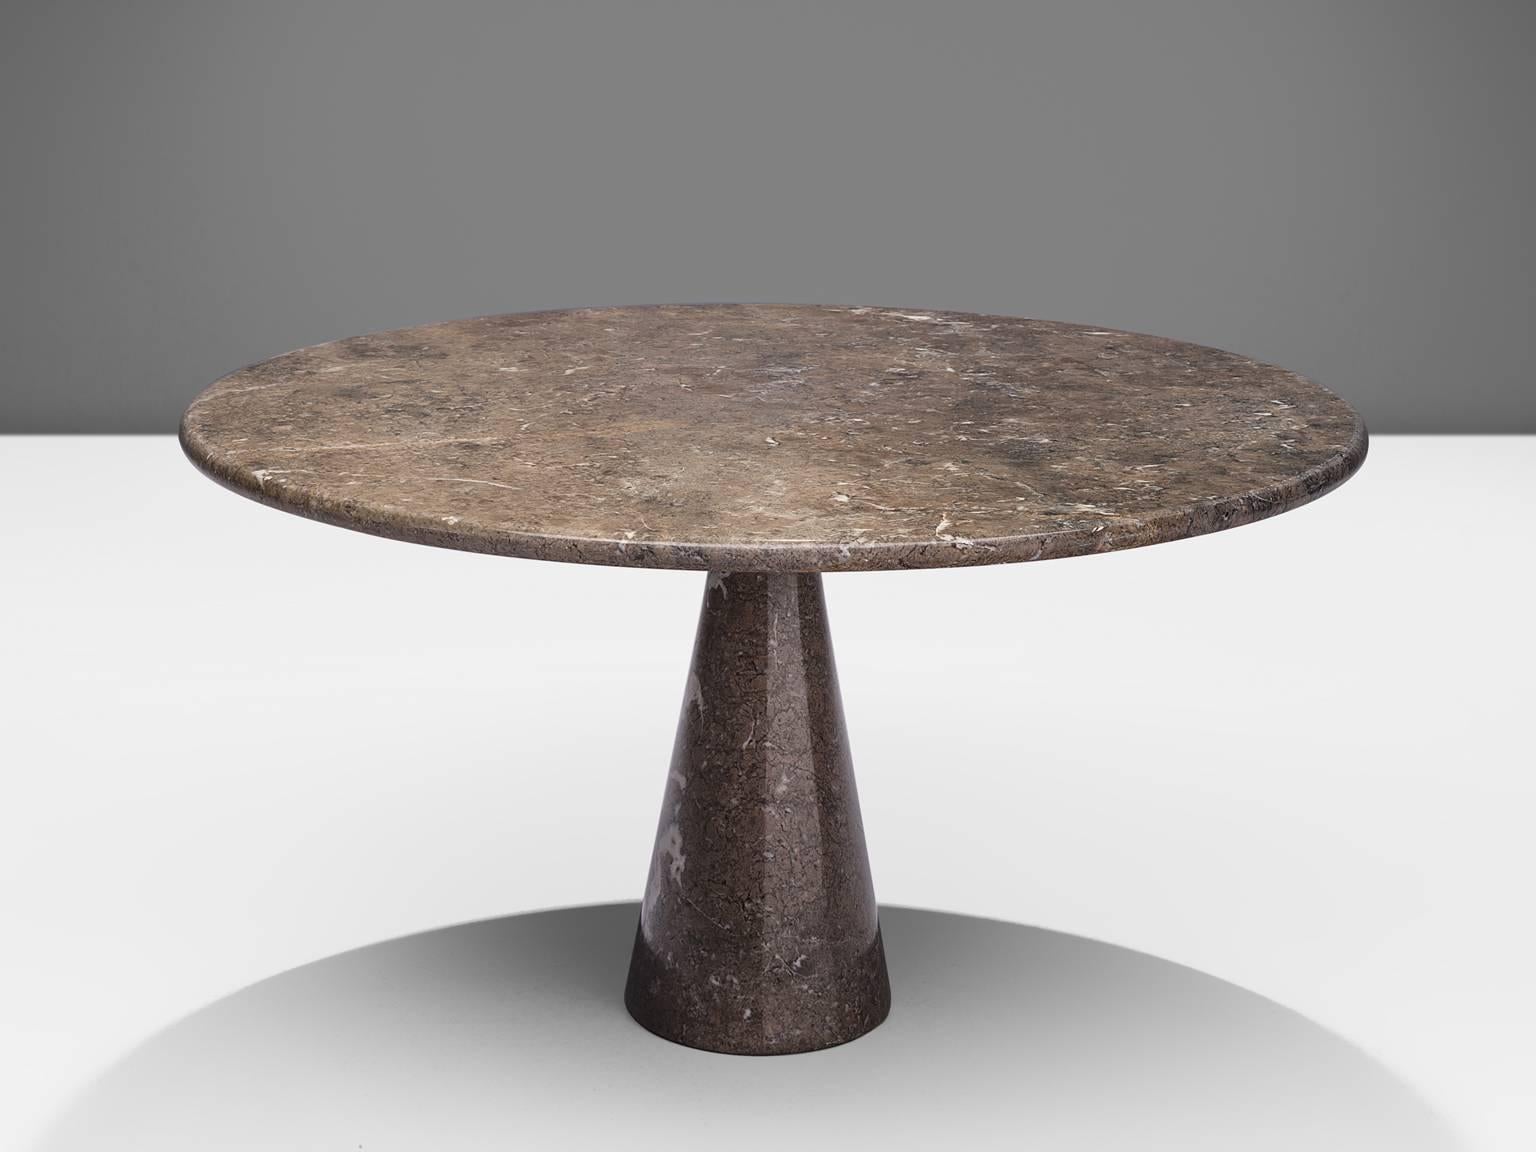 Angelo Mangiarotti for Skipper, table M1, marble, Italy, 1969.

This patterned brown to greyish table has a cone shaped base and a circular top. The circular top rests perfectly on the cone. The design showcases a play of balance and rhythm. The